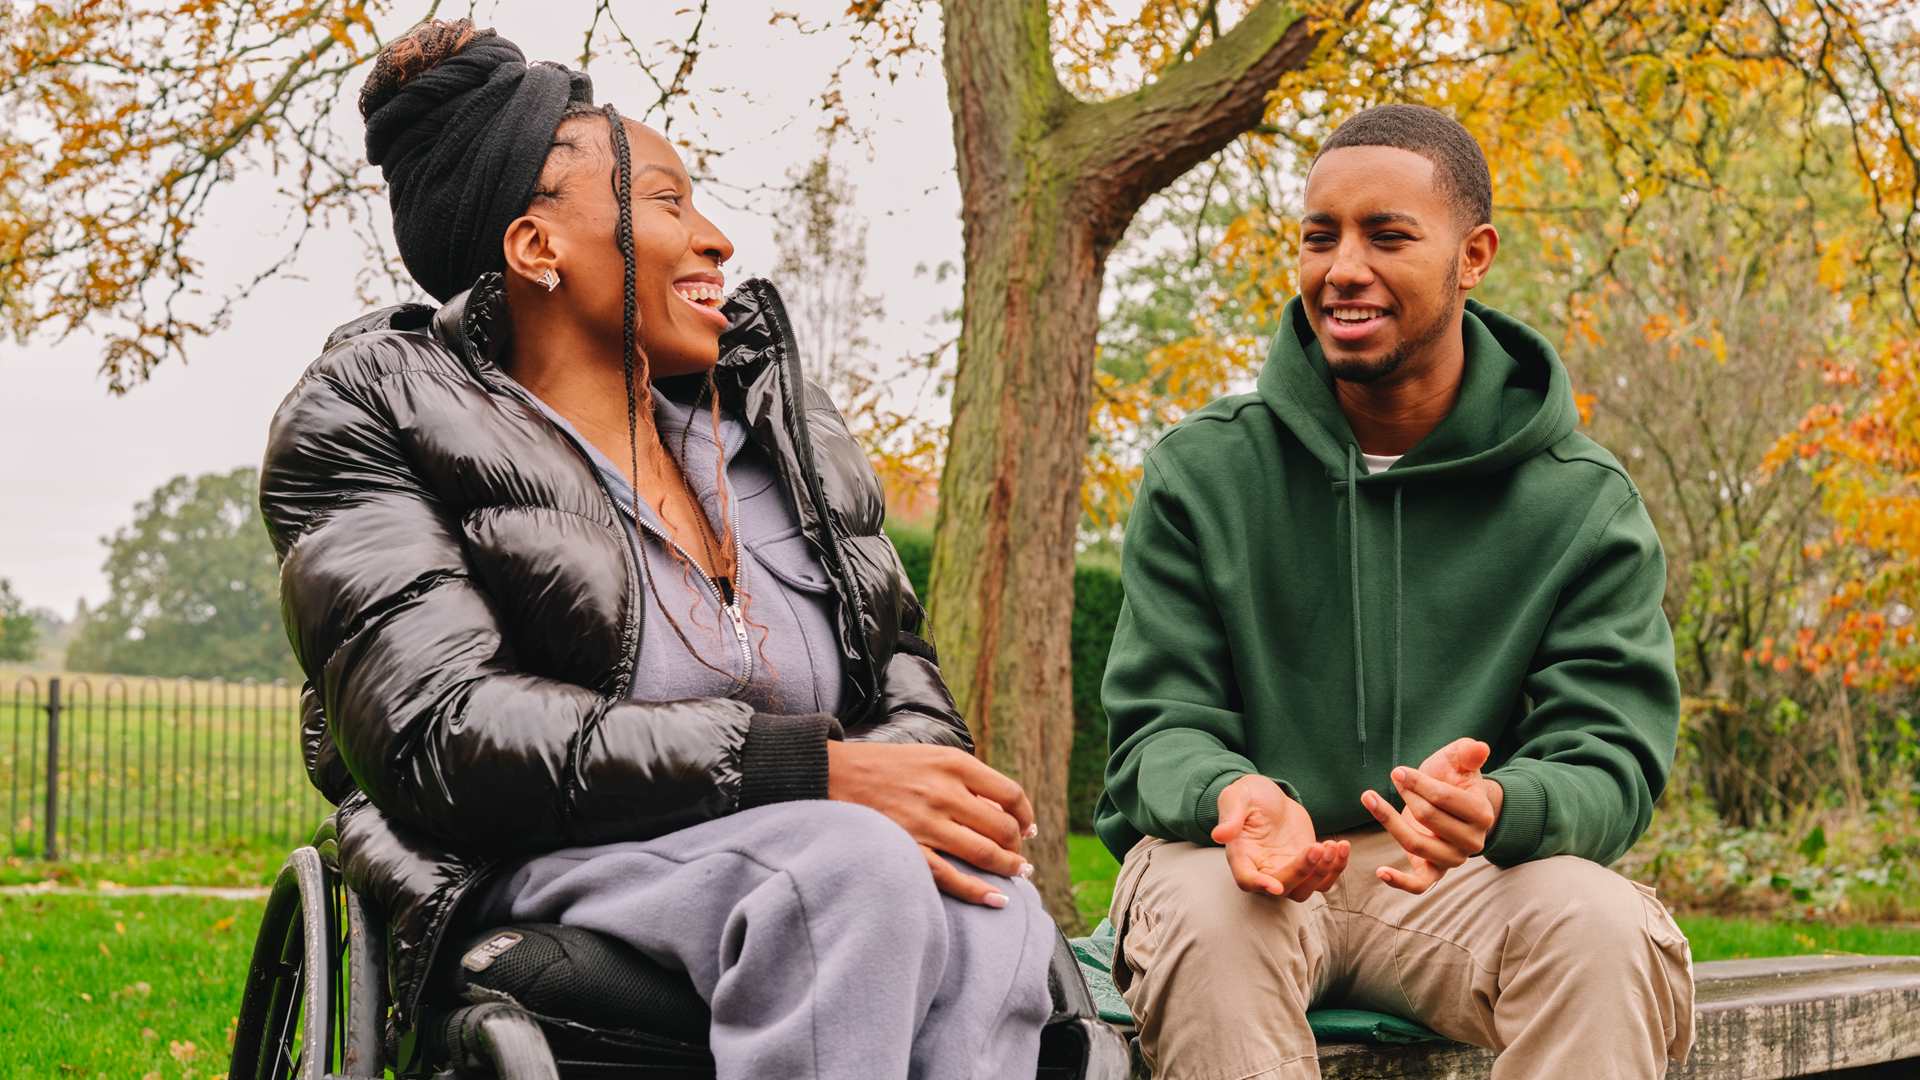 A young Black woman in a wheelchair talking to a young Black man on a bench in the park. The woman is laughing while the man explains something.